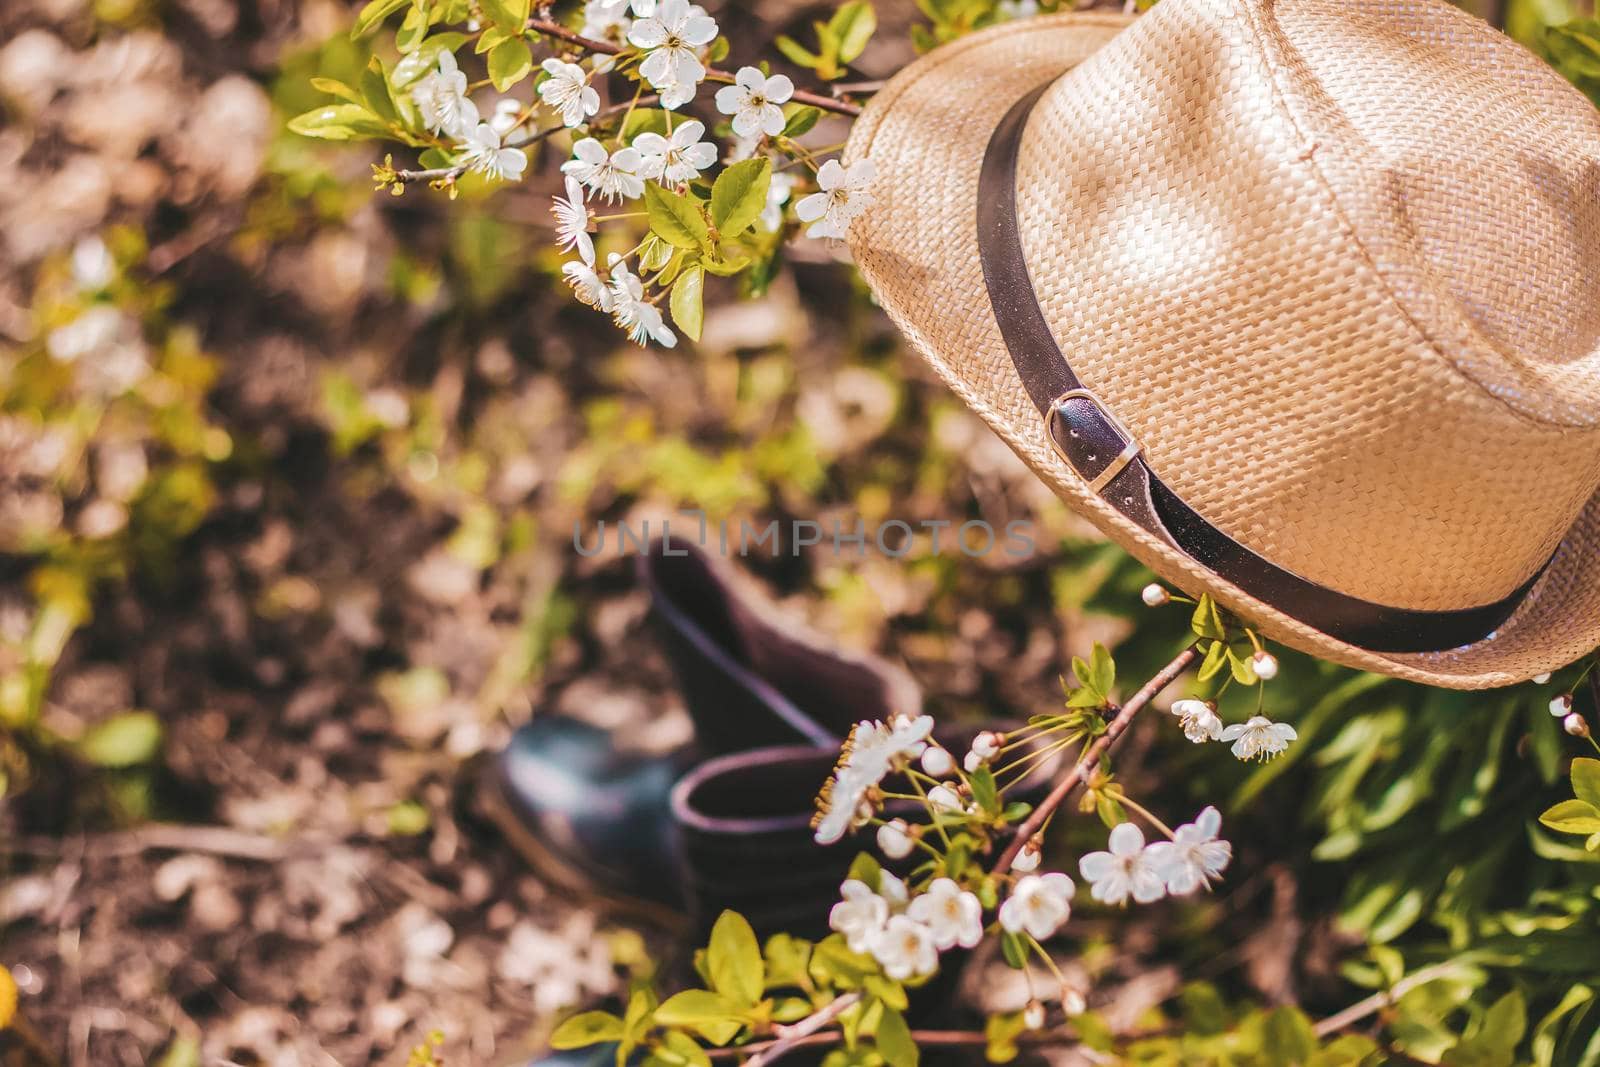 In the garden, on a tree with white cherry blossoms, there is a garden hat, and under it are boots. Gardening and gardening, Active recreation in the country